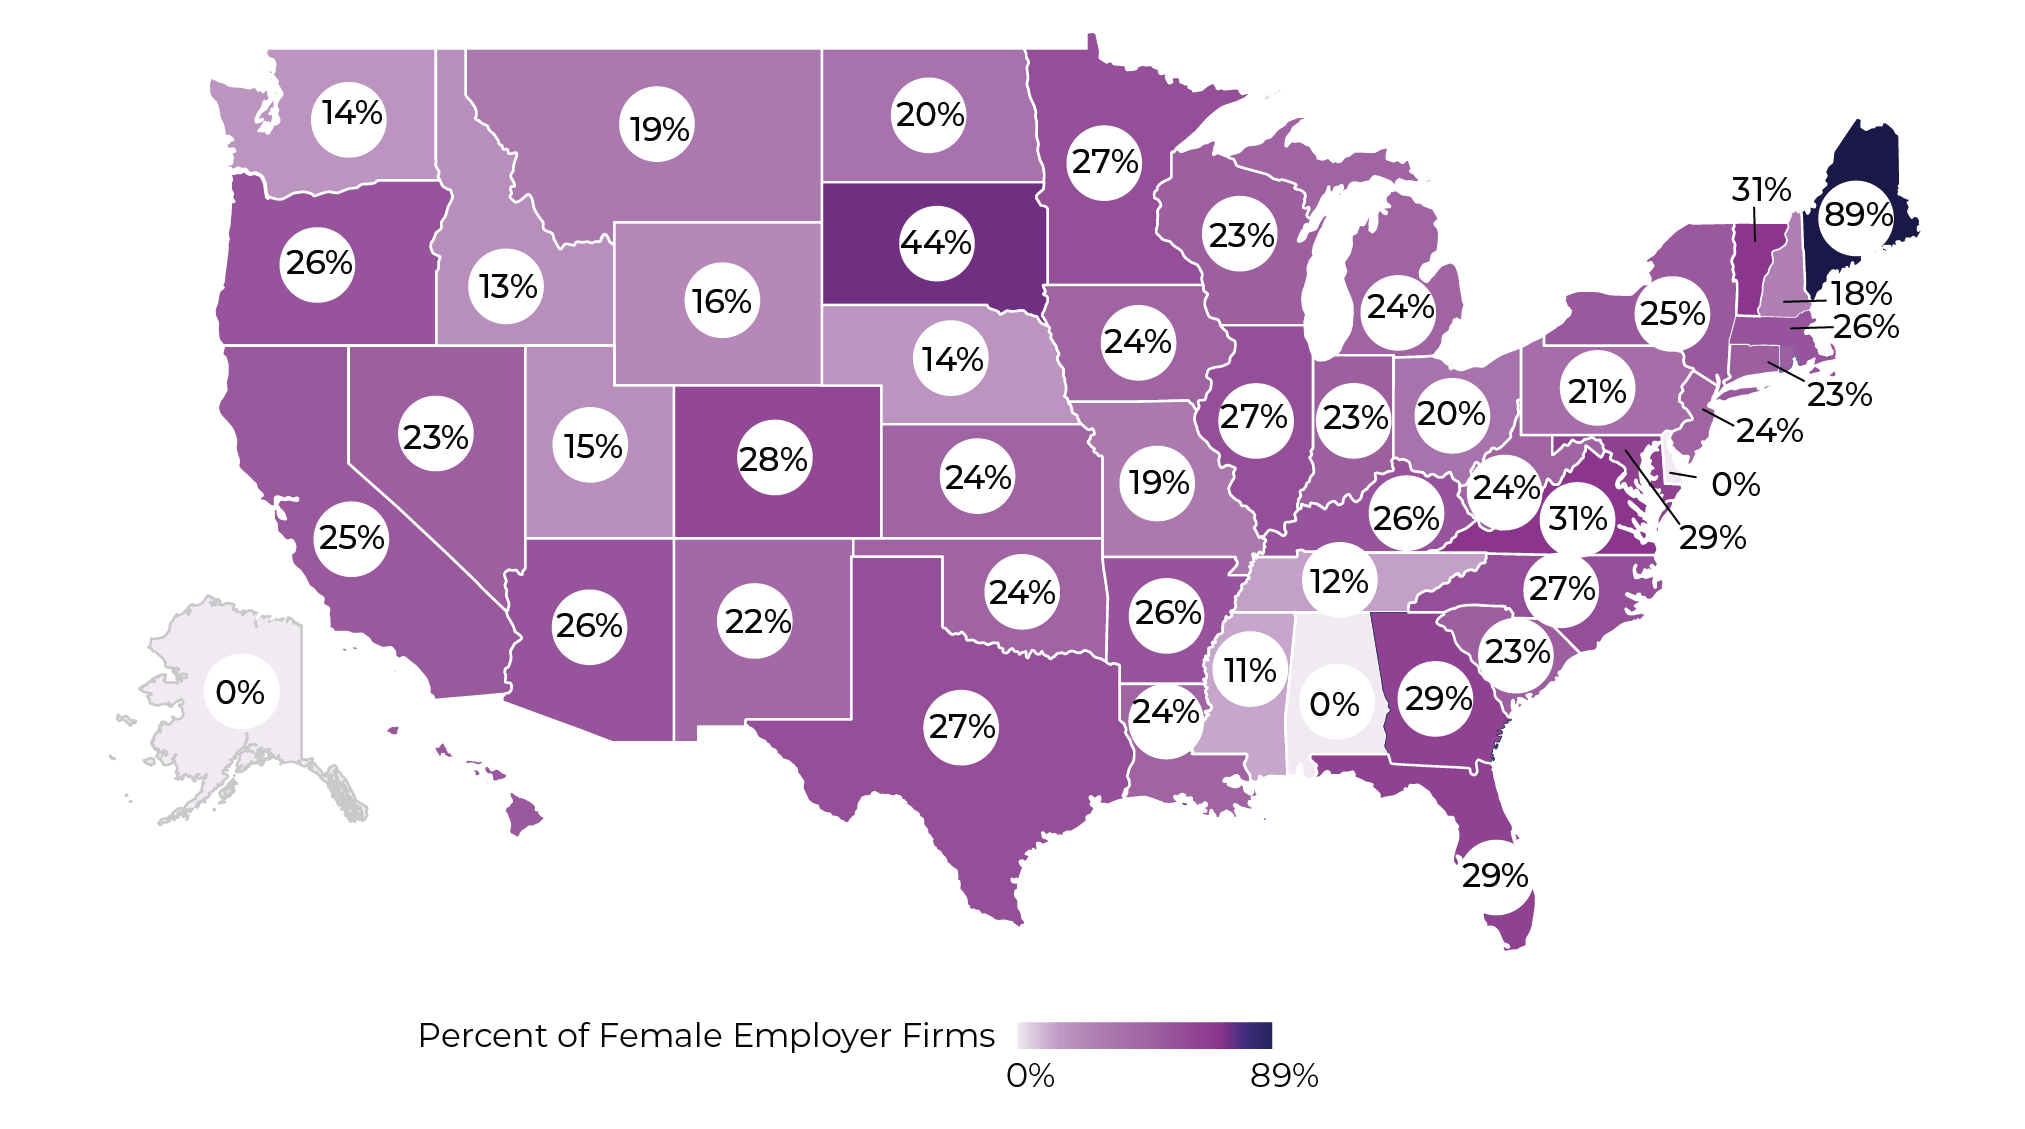 Figure 12. Percent of STEM Female Employer Firms by State (2019)